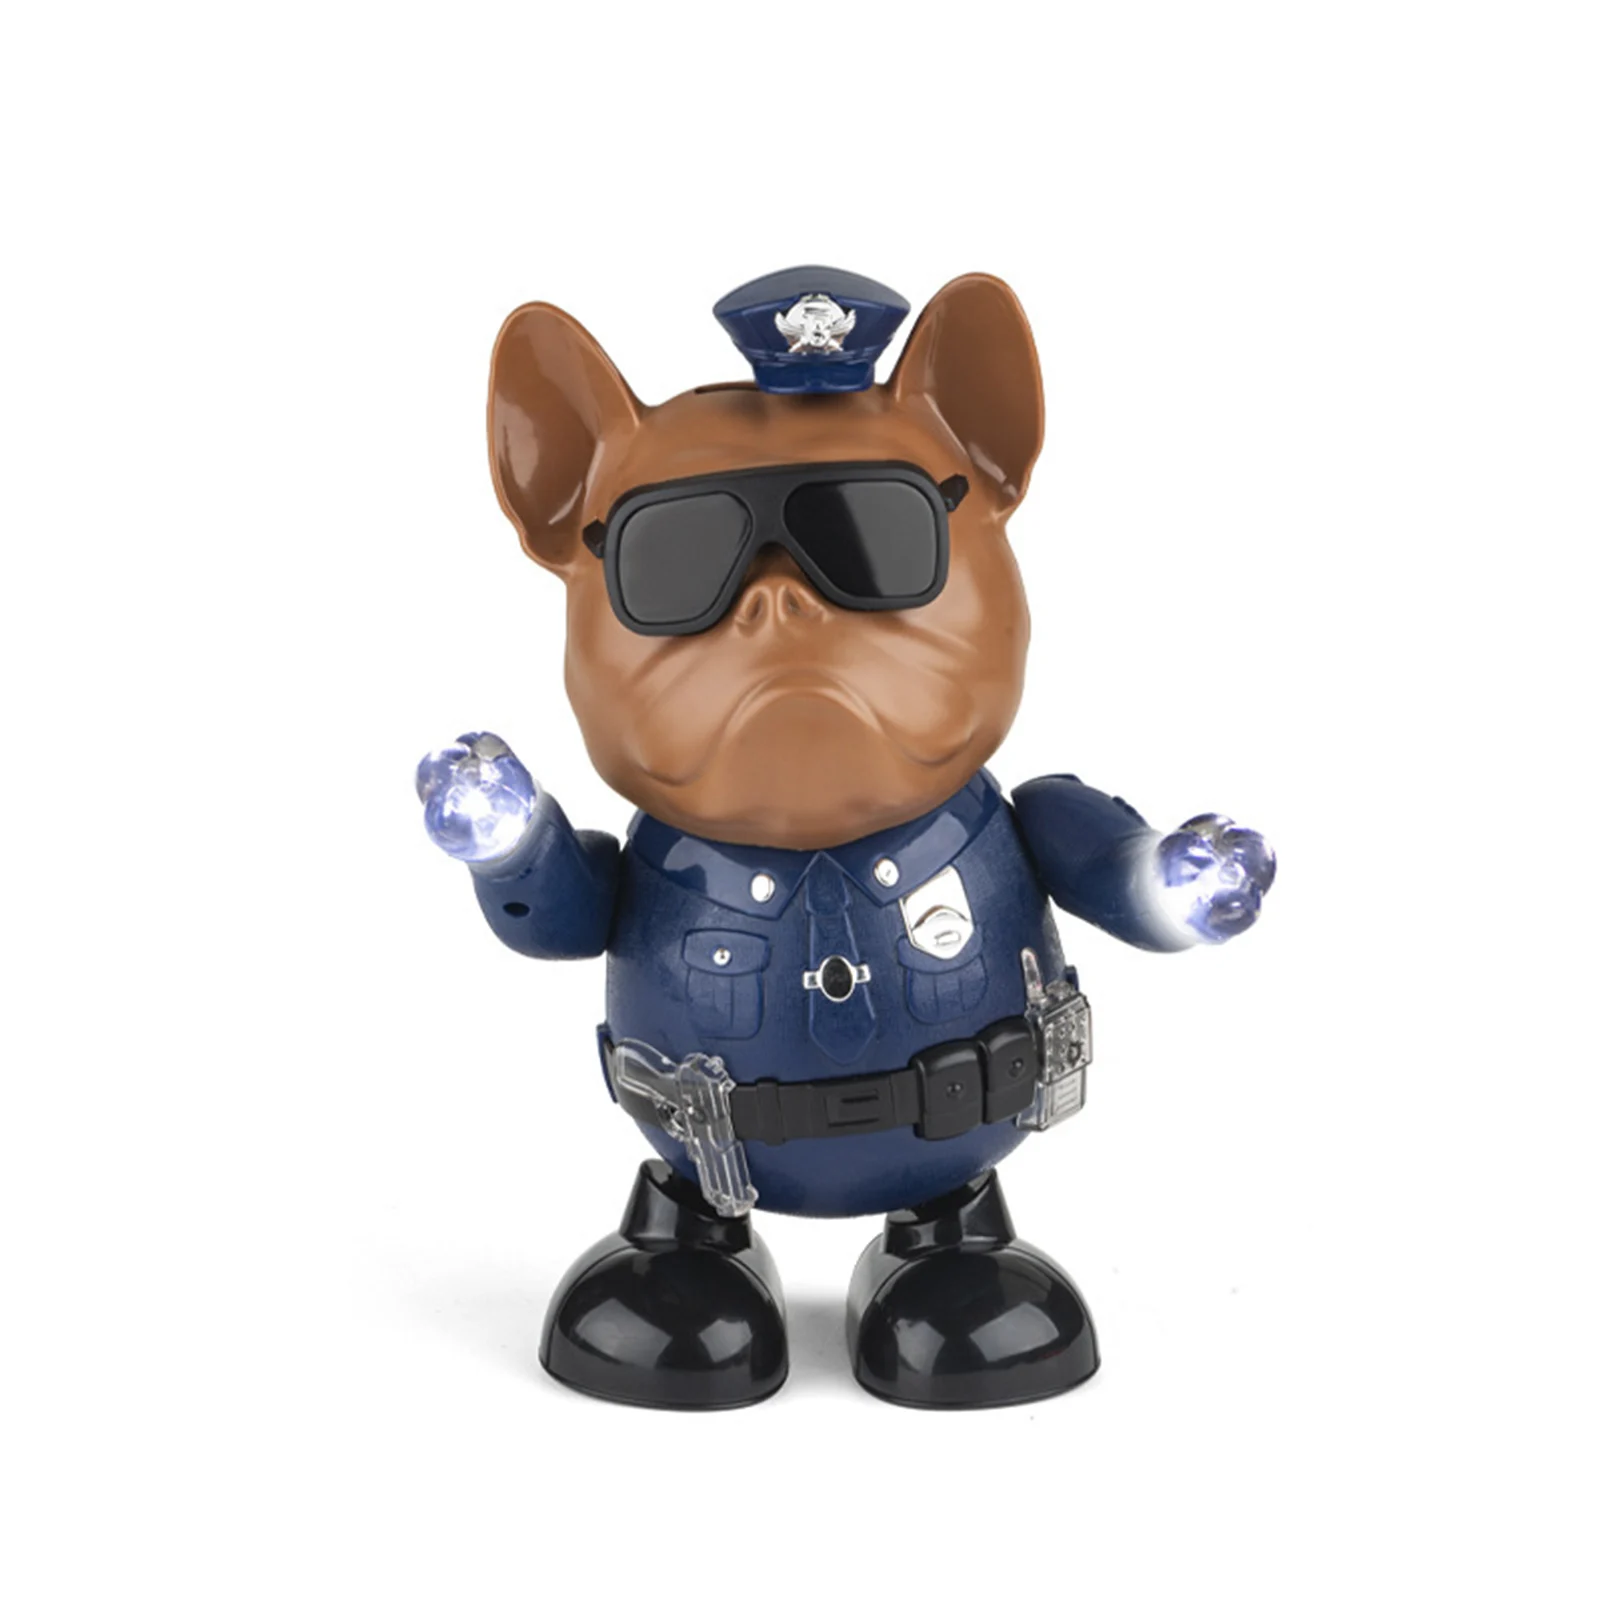 

Walking Dancing Police Dog Toys For Kids Robot Toy With LED Flashing Lights And Music Smart Interactive Electronic Singing Toy